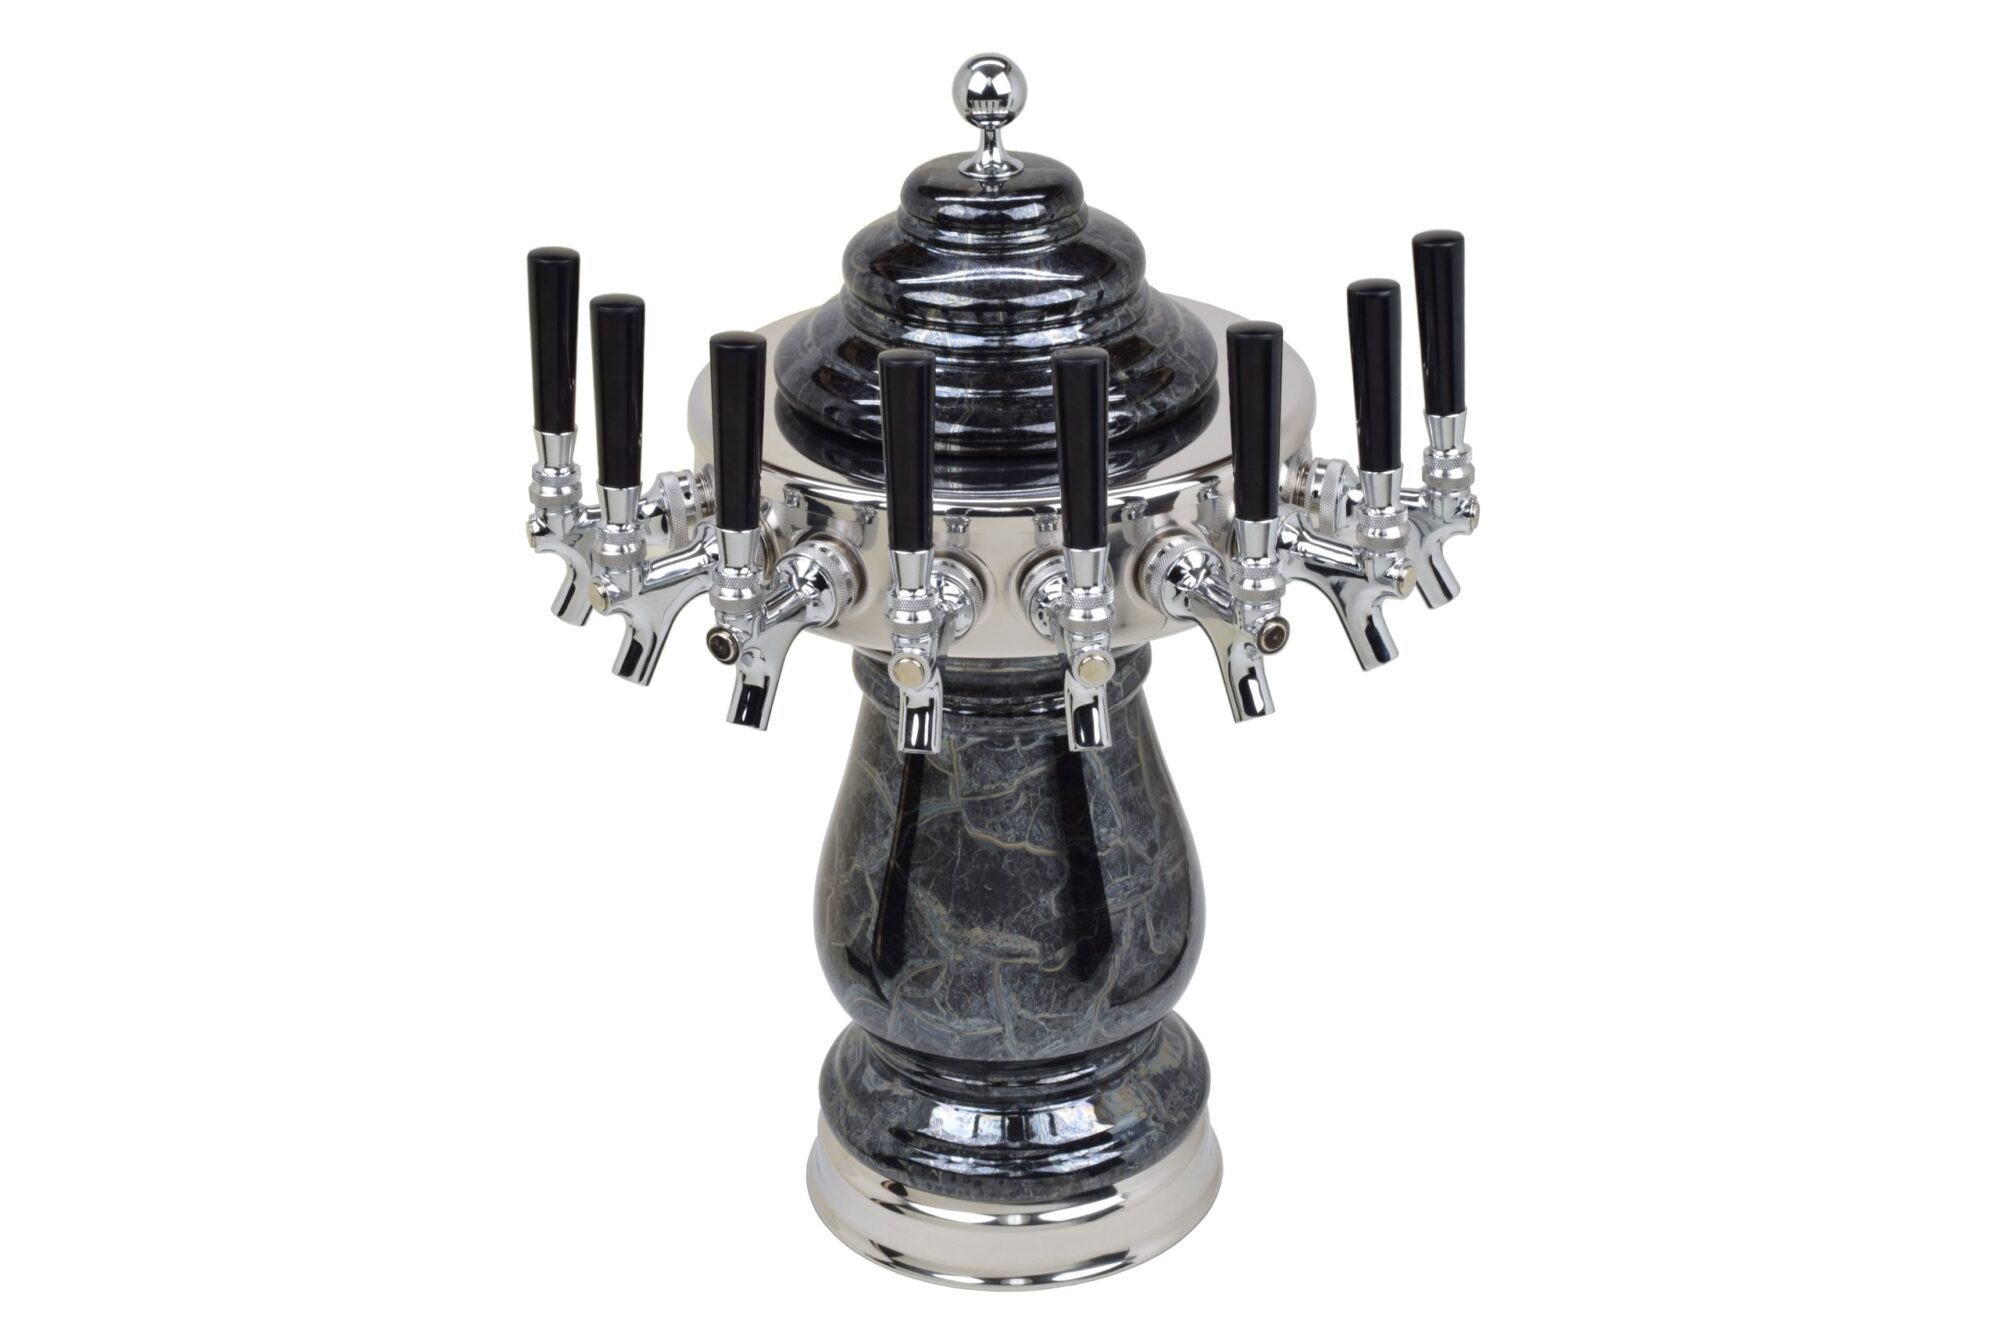 884C-8-BM Eight Faucet Ceramic Tower with Chrome Hardware and Faucets - Shown in Black Marble